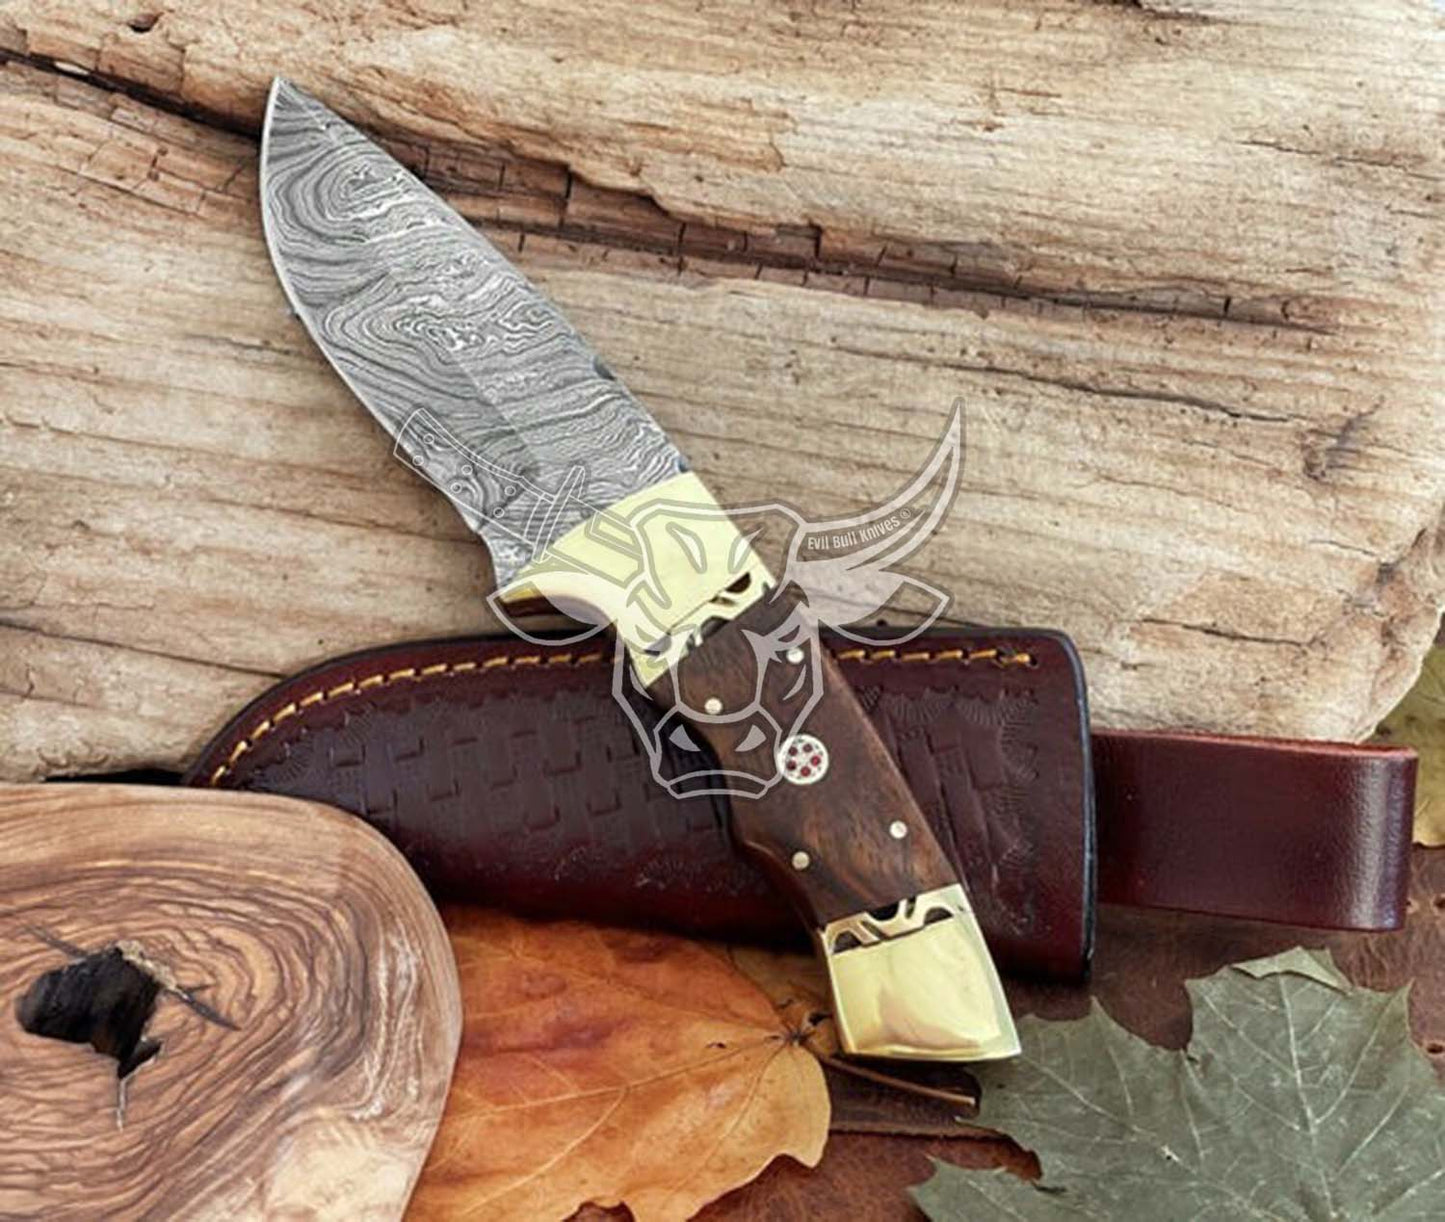 EBK-111 DAMASCUS STEEL KNIFE 9" CUSTOM FIXED BLADE KNIFE BRASS WITH ROSE WOOD HANDLE GIFT FOR HIM